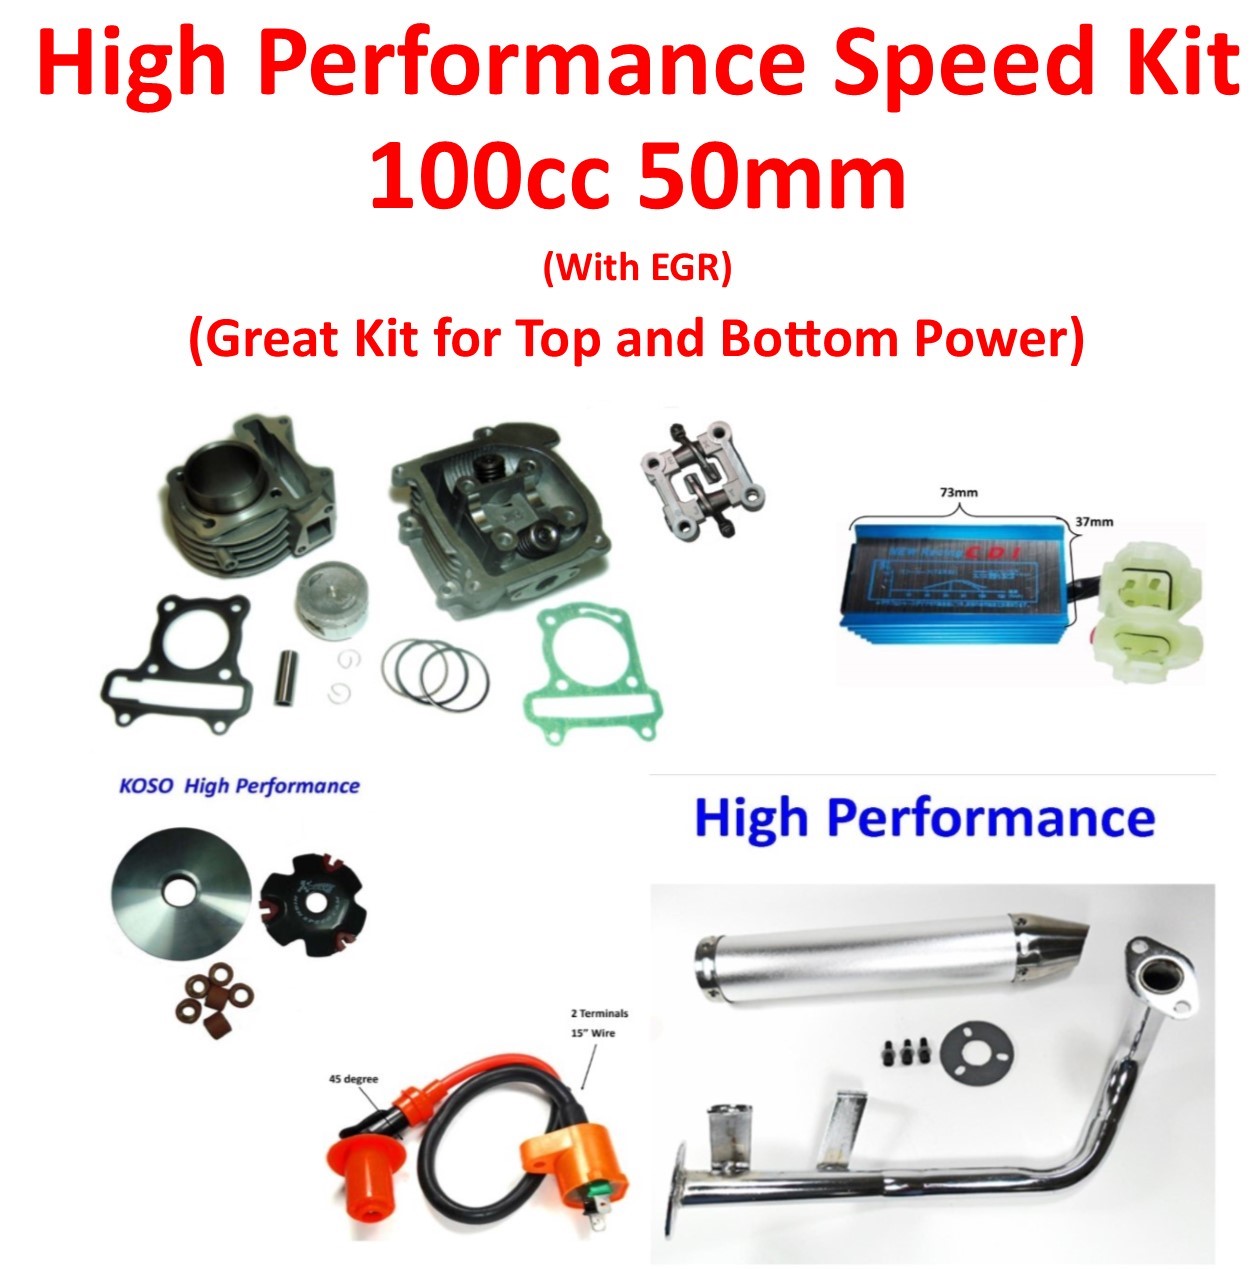 High Performance Speed Kit GY6-100CC (50mm) Comes With All Parts Shown.